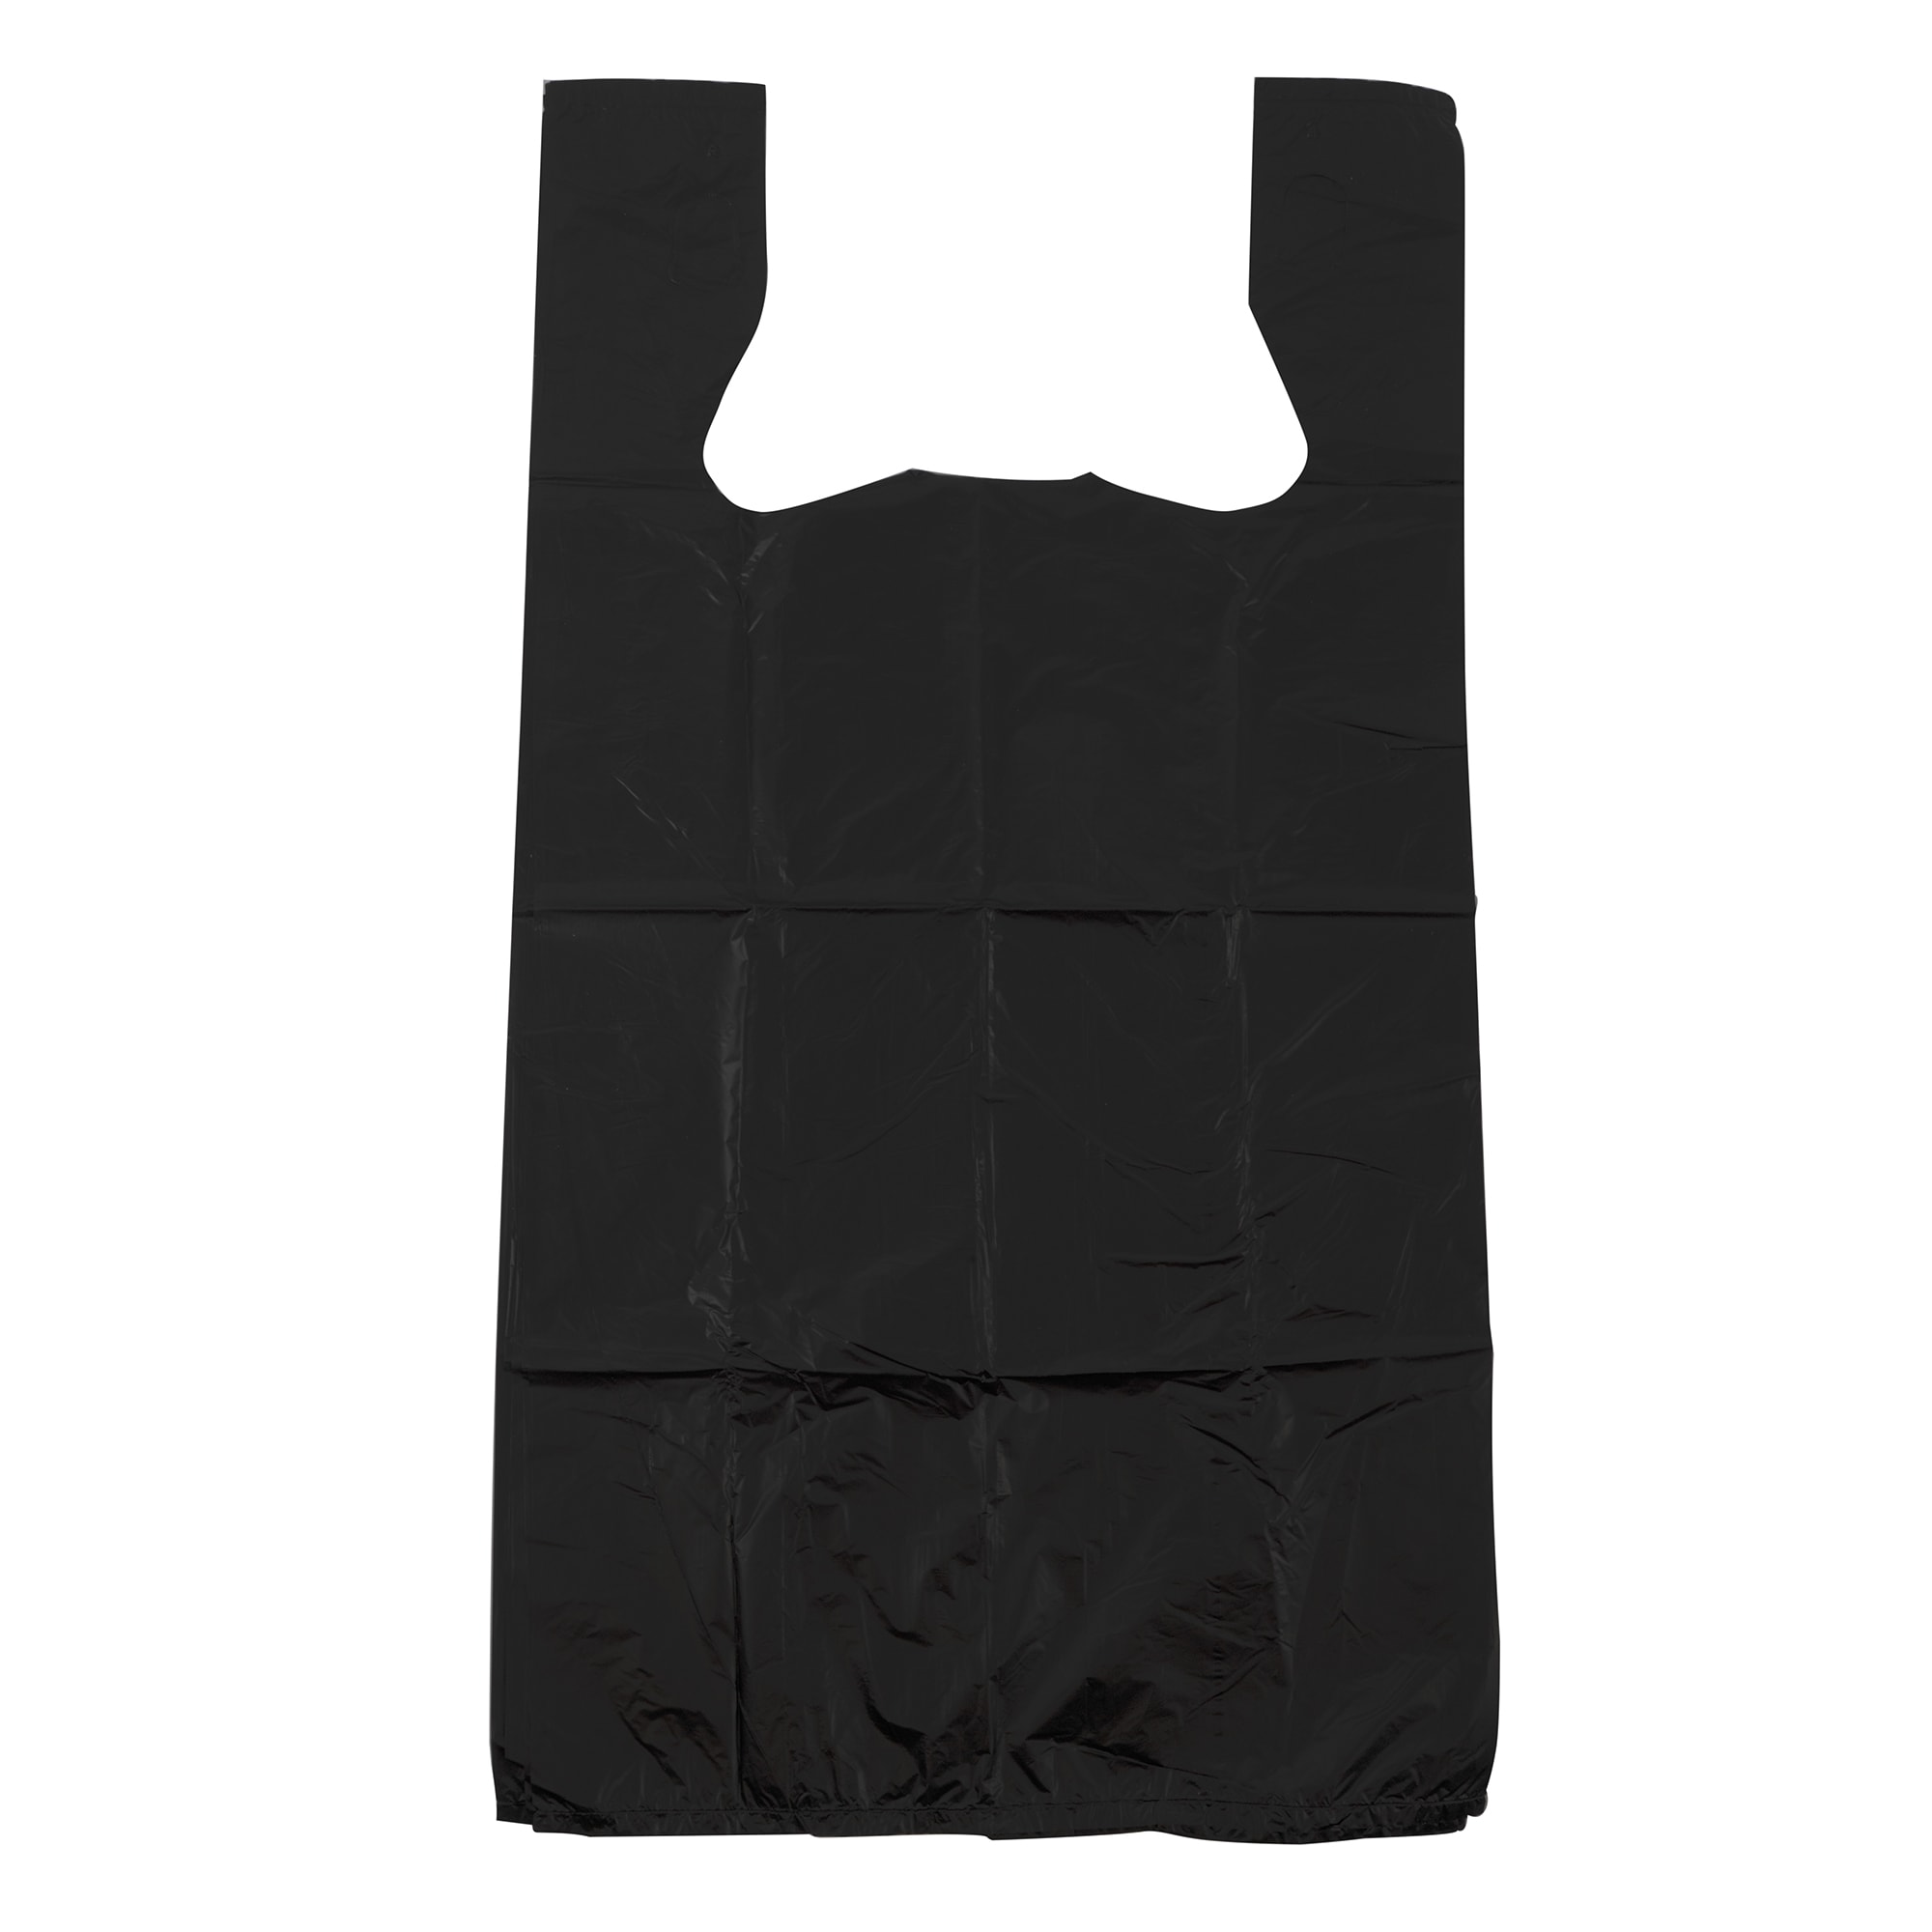 Rofson TBLK1000 Plastic Take Out Bag - 12